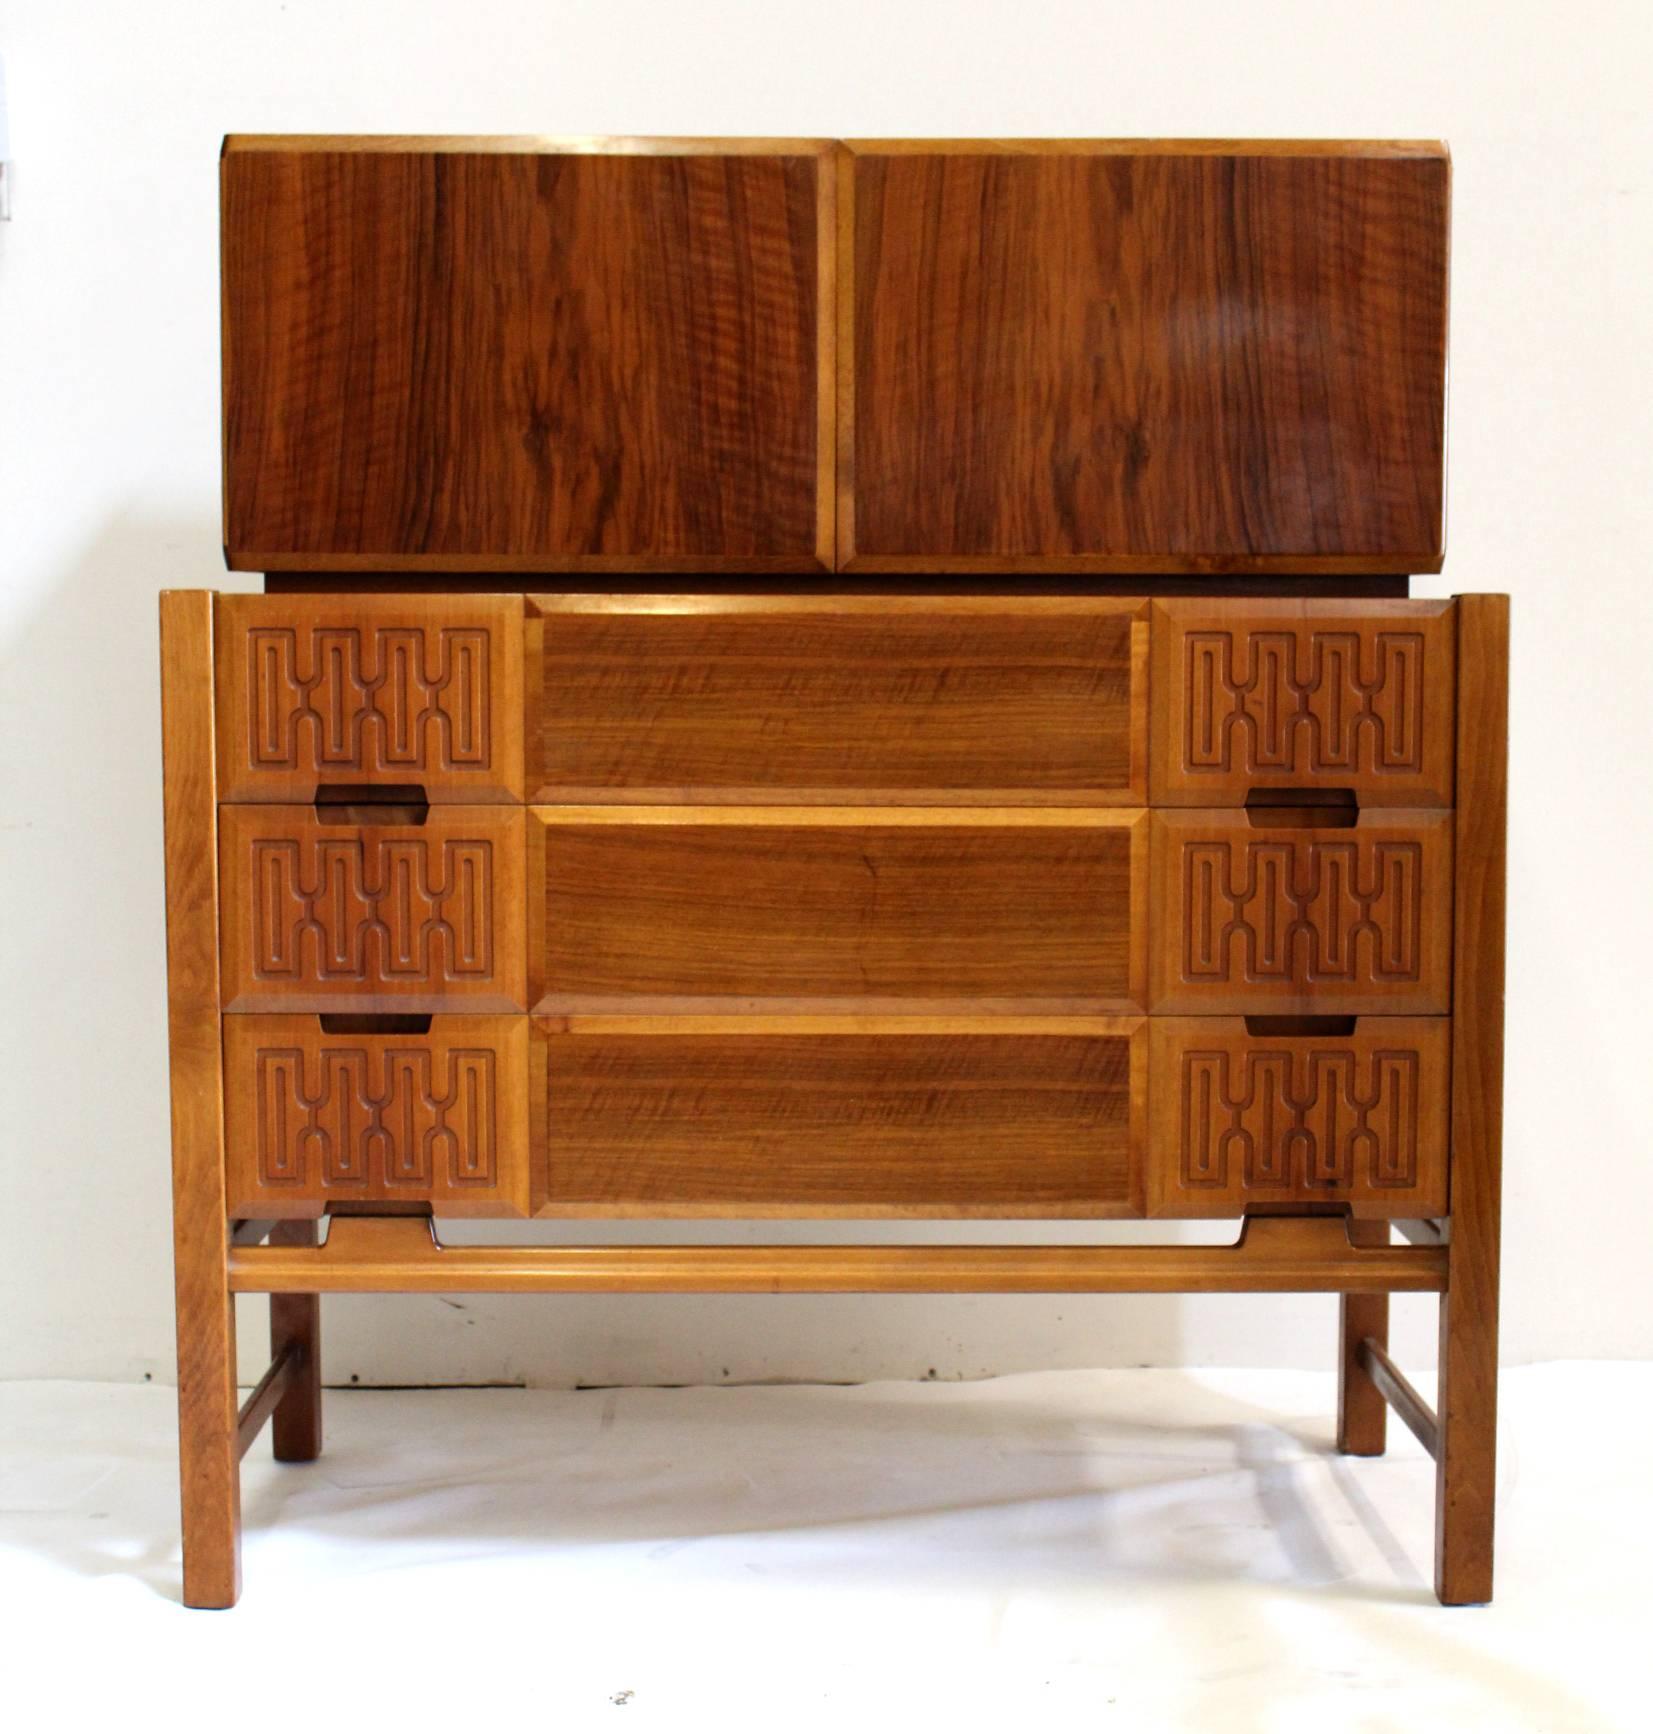 Modernist, two-piece cabinet by Swedish designer Edmund J. Spence. Two doors over three drawers. Decorative relief panels to drawer fronts. Raised on stretcher base. Marked “Made in Sweden”.